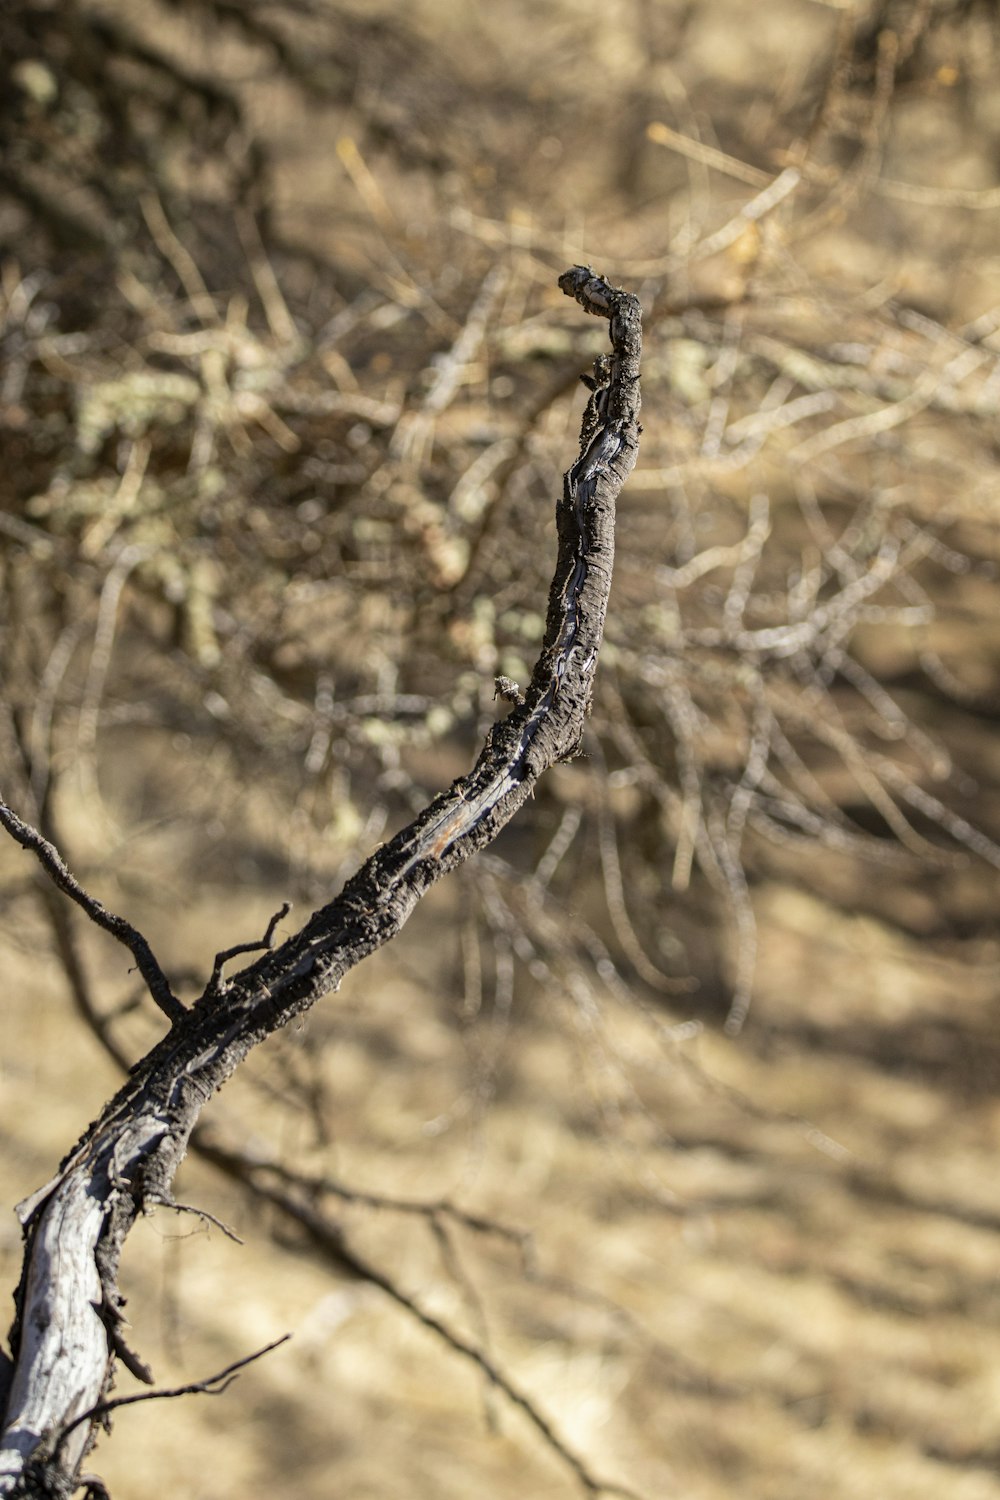 a tree branch with no leaves